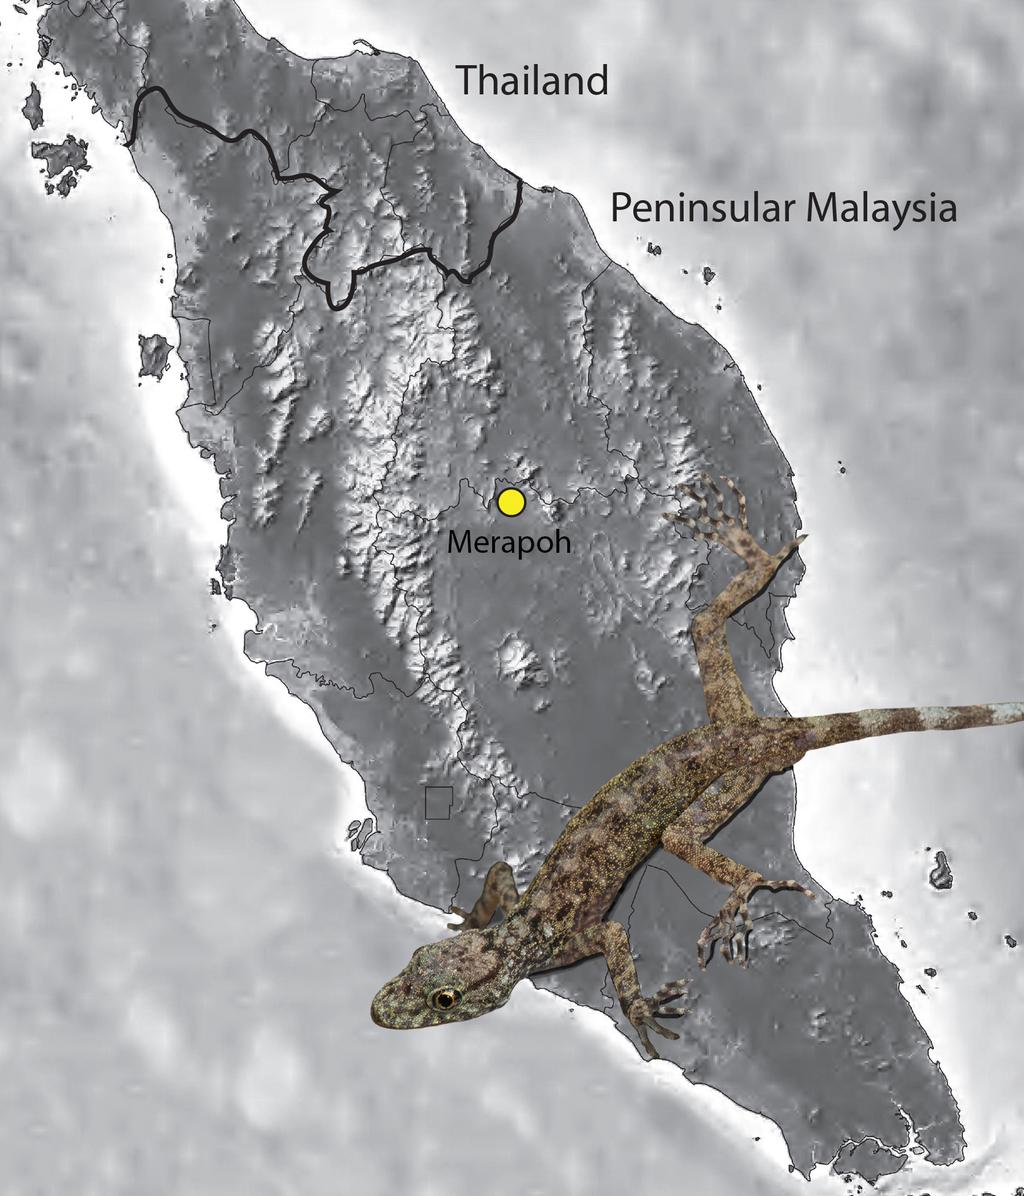 FIGURE 2. Map showing the location of the type locality Gua Gunting, Merapoh, Pahang, Peninsular Malaysia for Cnemaspis selamatkanmerapoh sp. nov. Natural history.